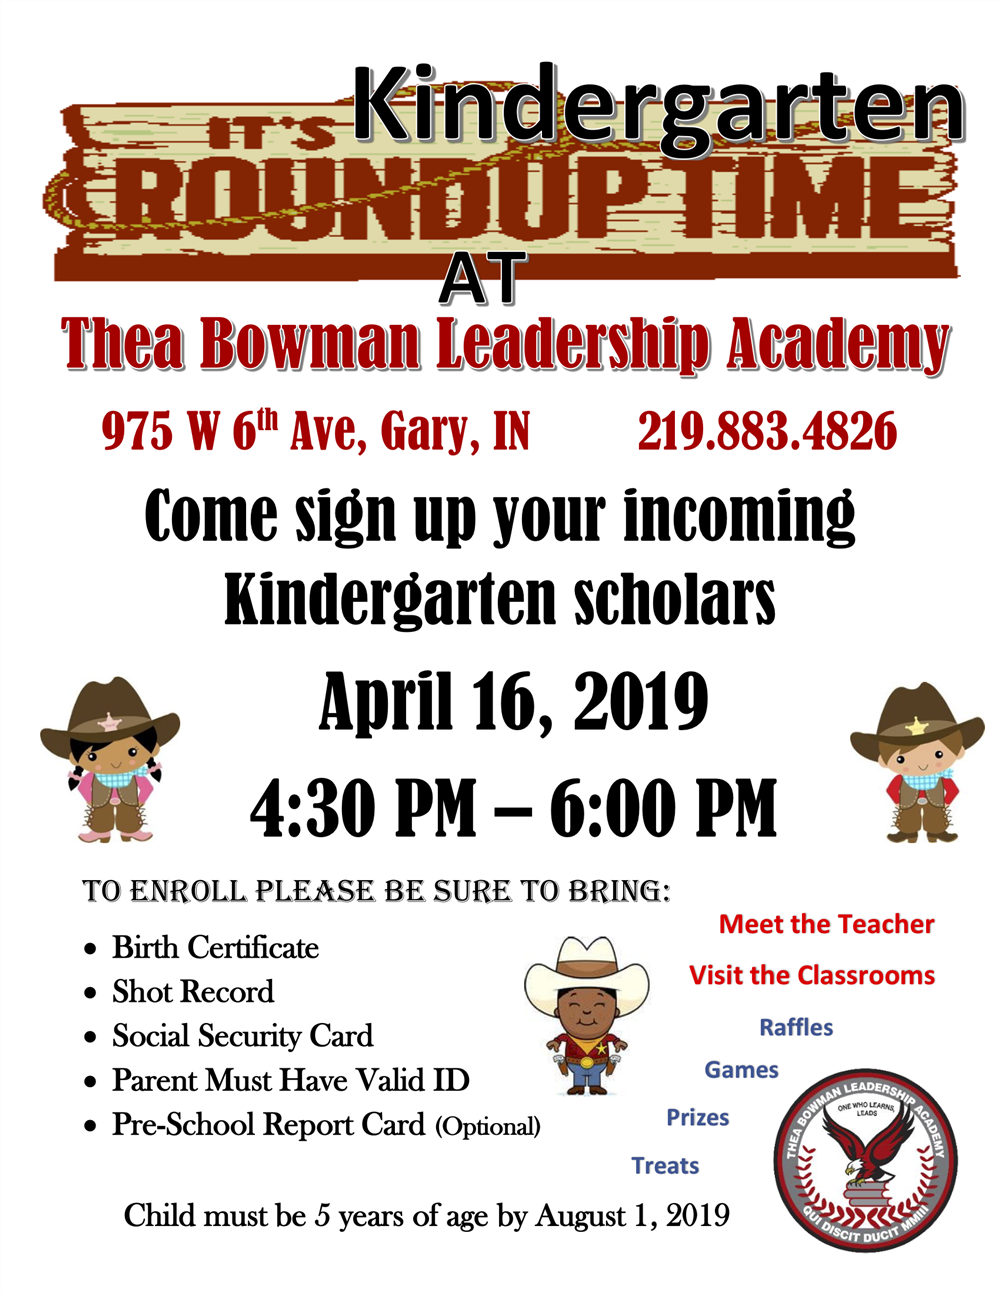 Thea Bowman Leadership Academy to host Kinder Roundup April 16th  